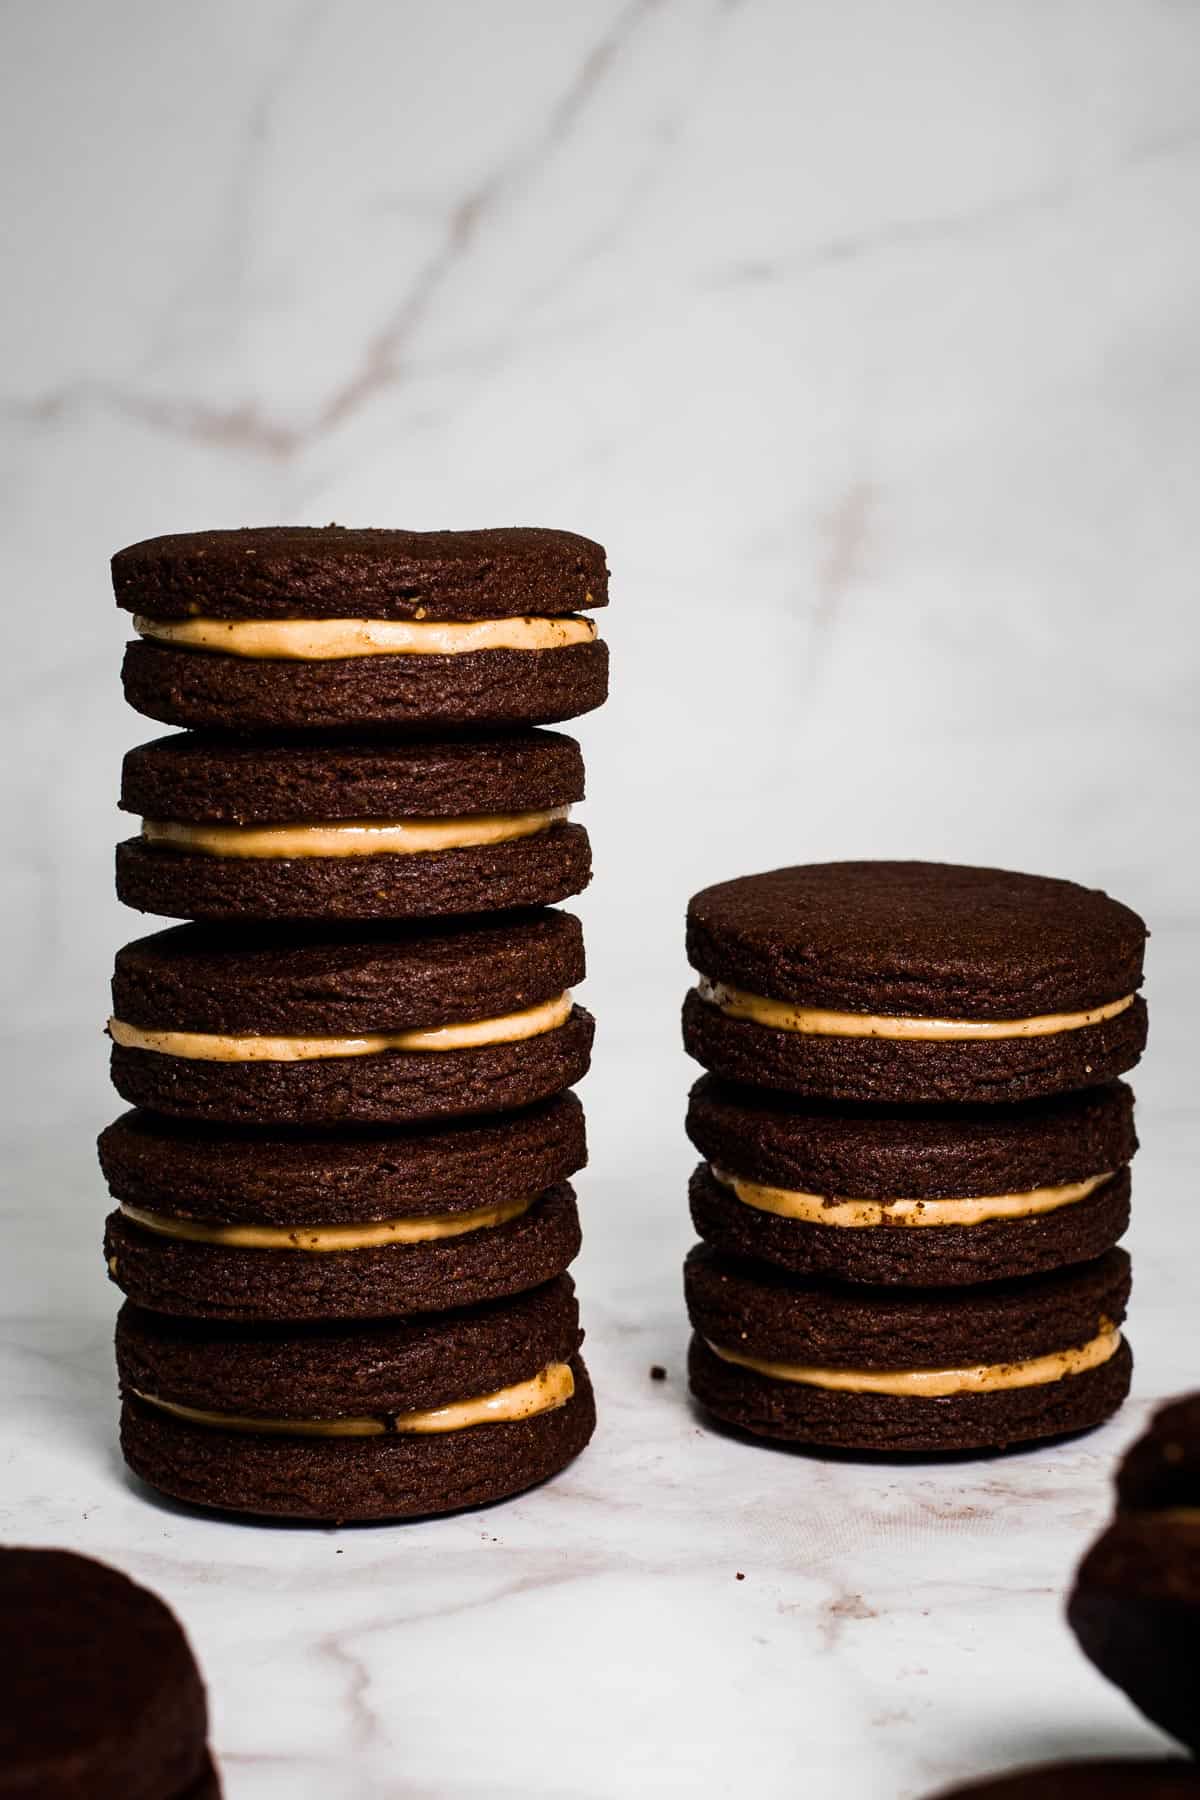 Two stacks of chocolate peanut butter sandwich cookies.